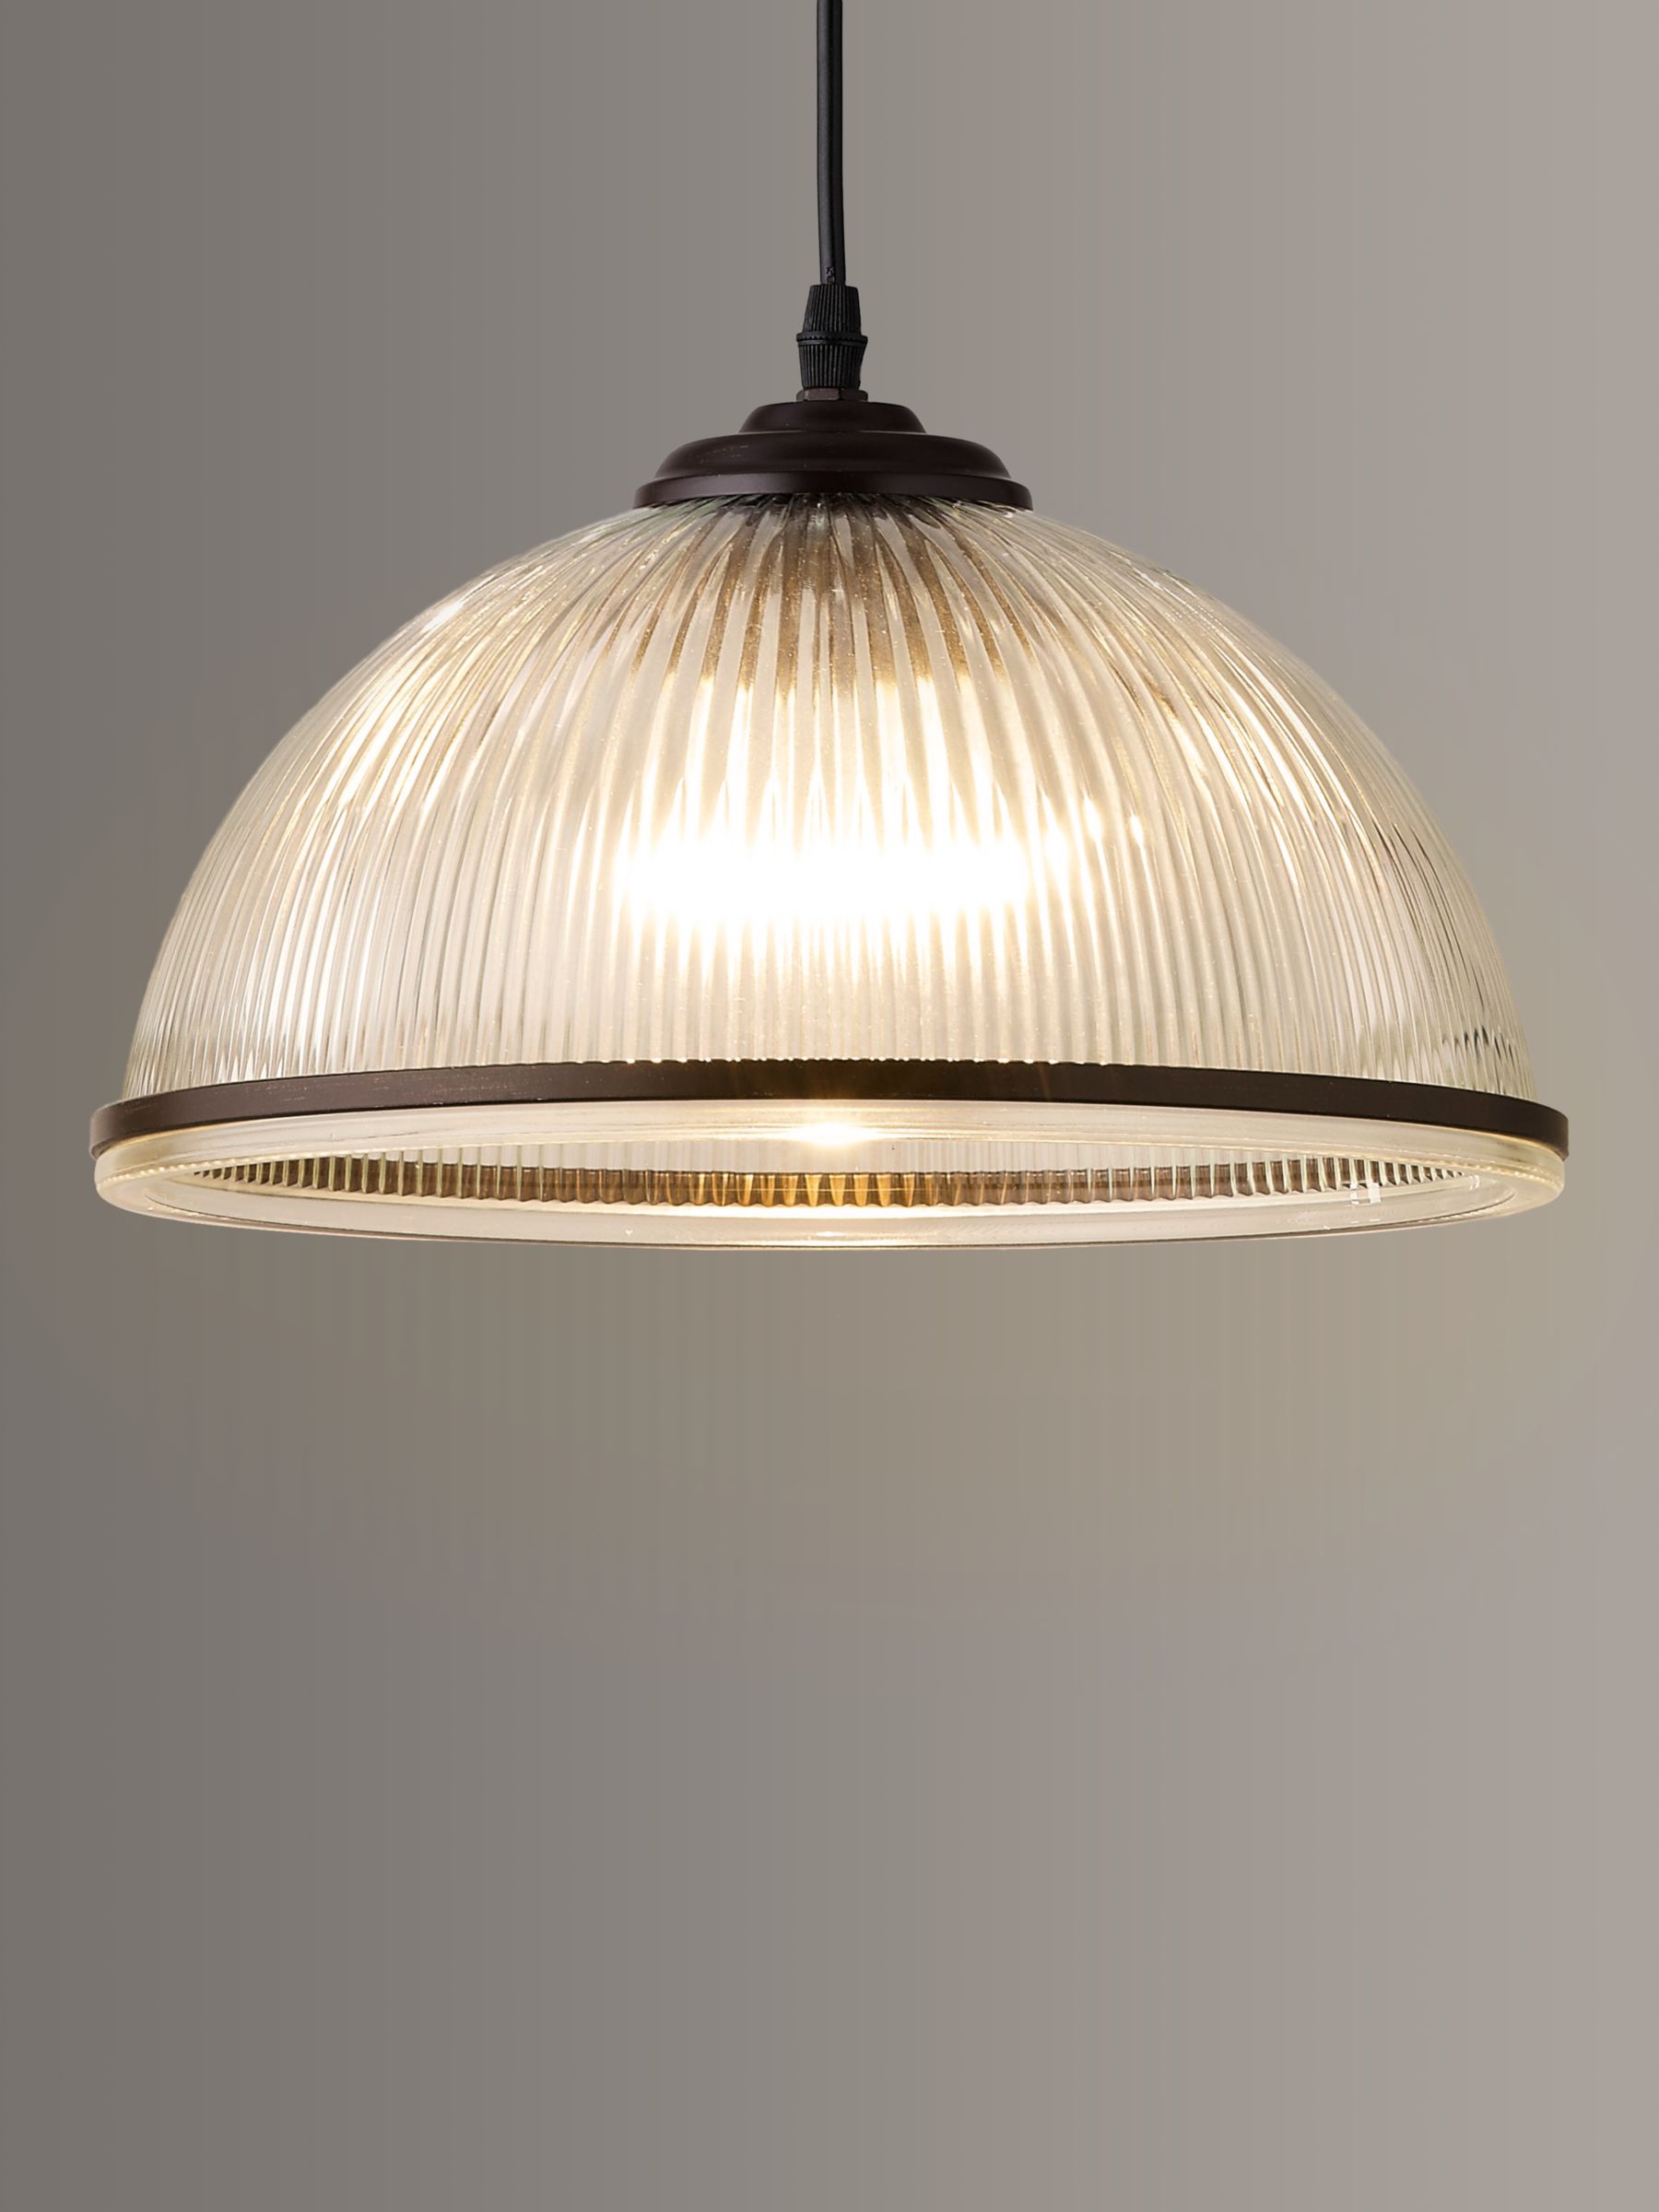 Photo of Croft collection tristan ceiling light